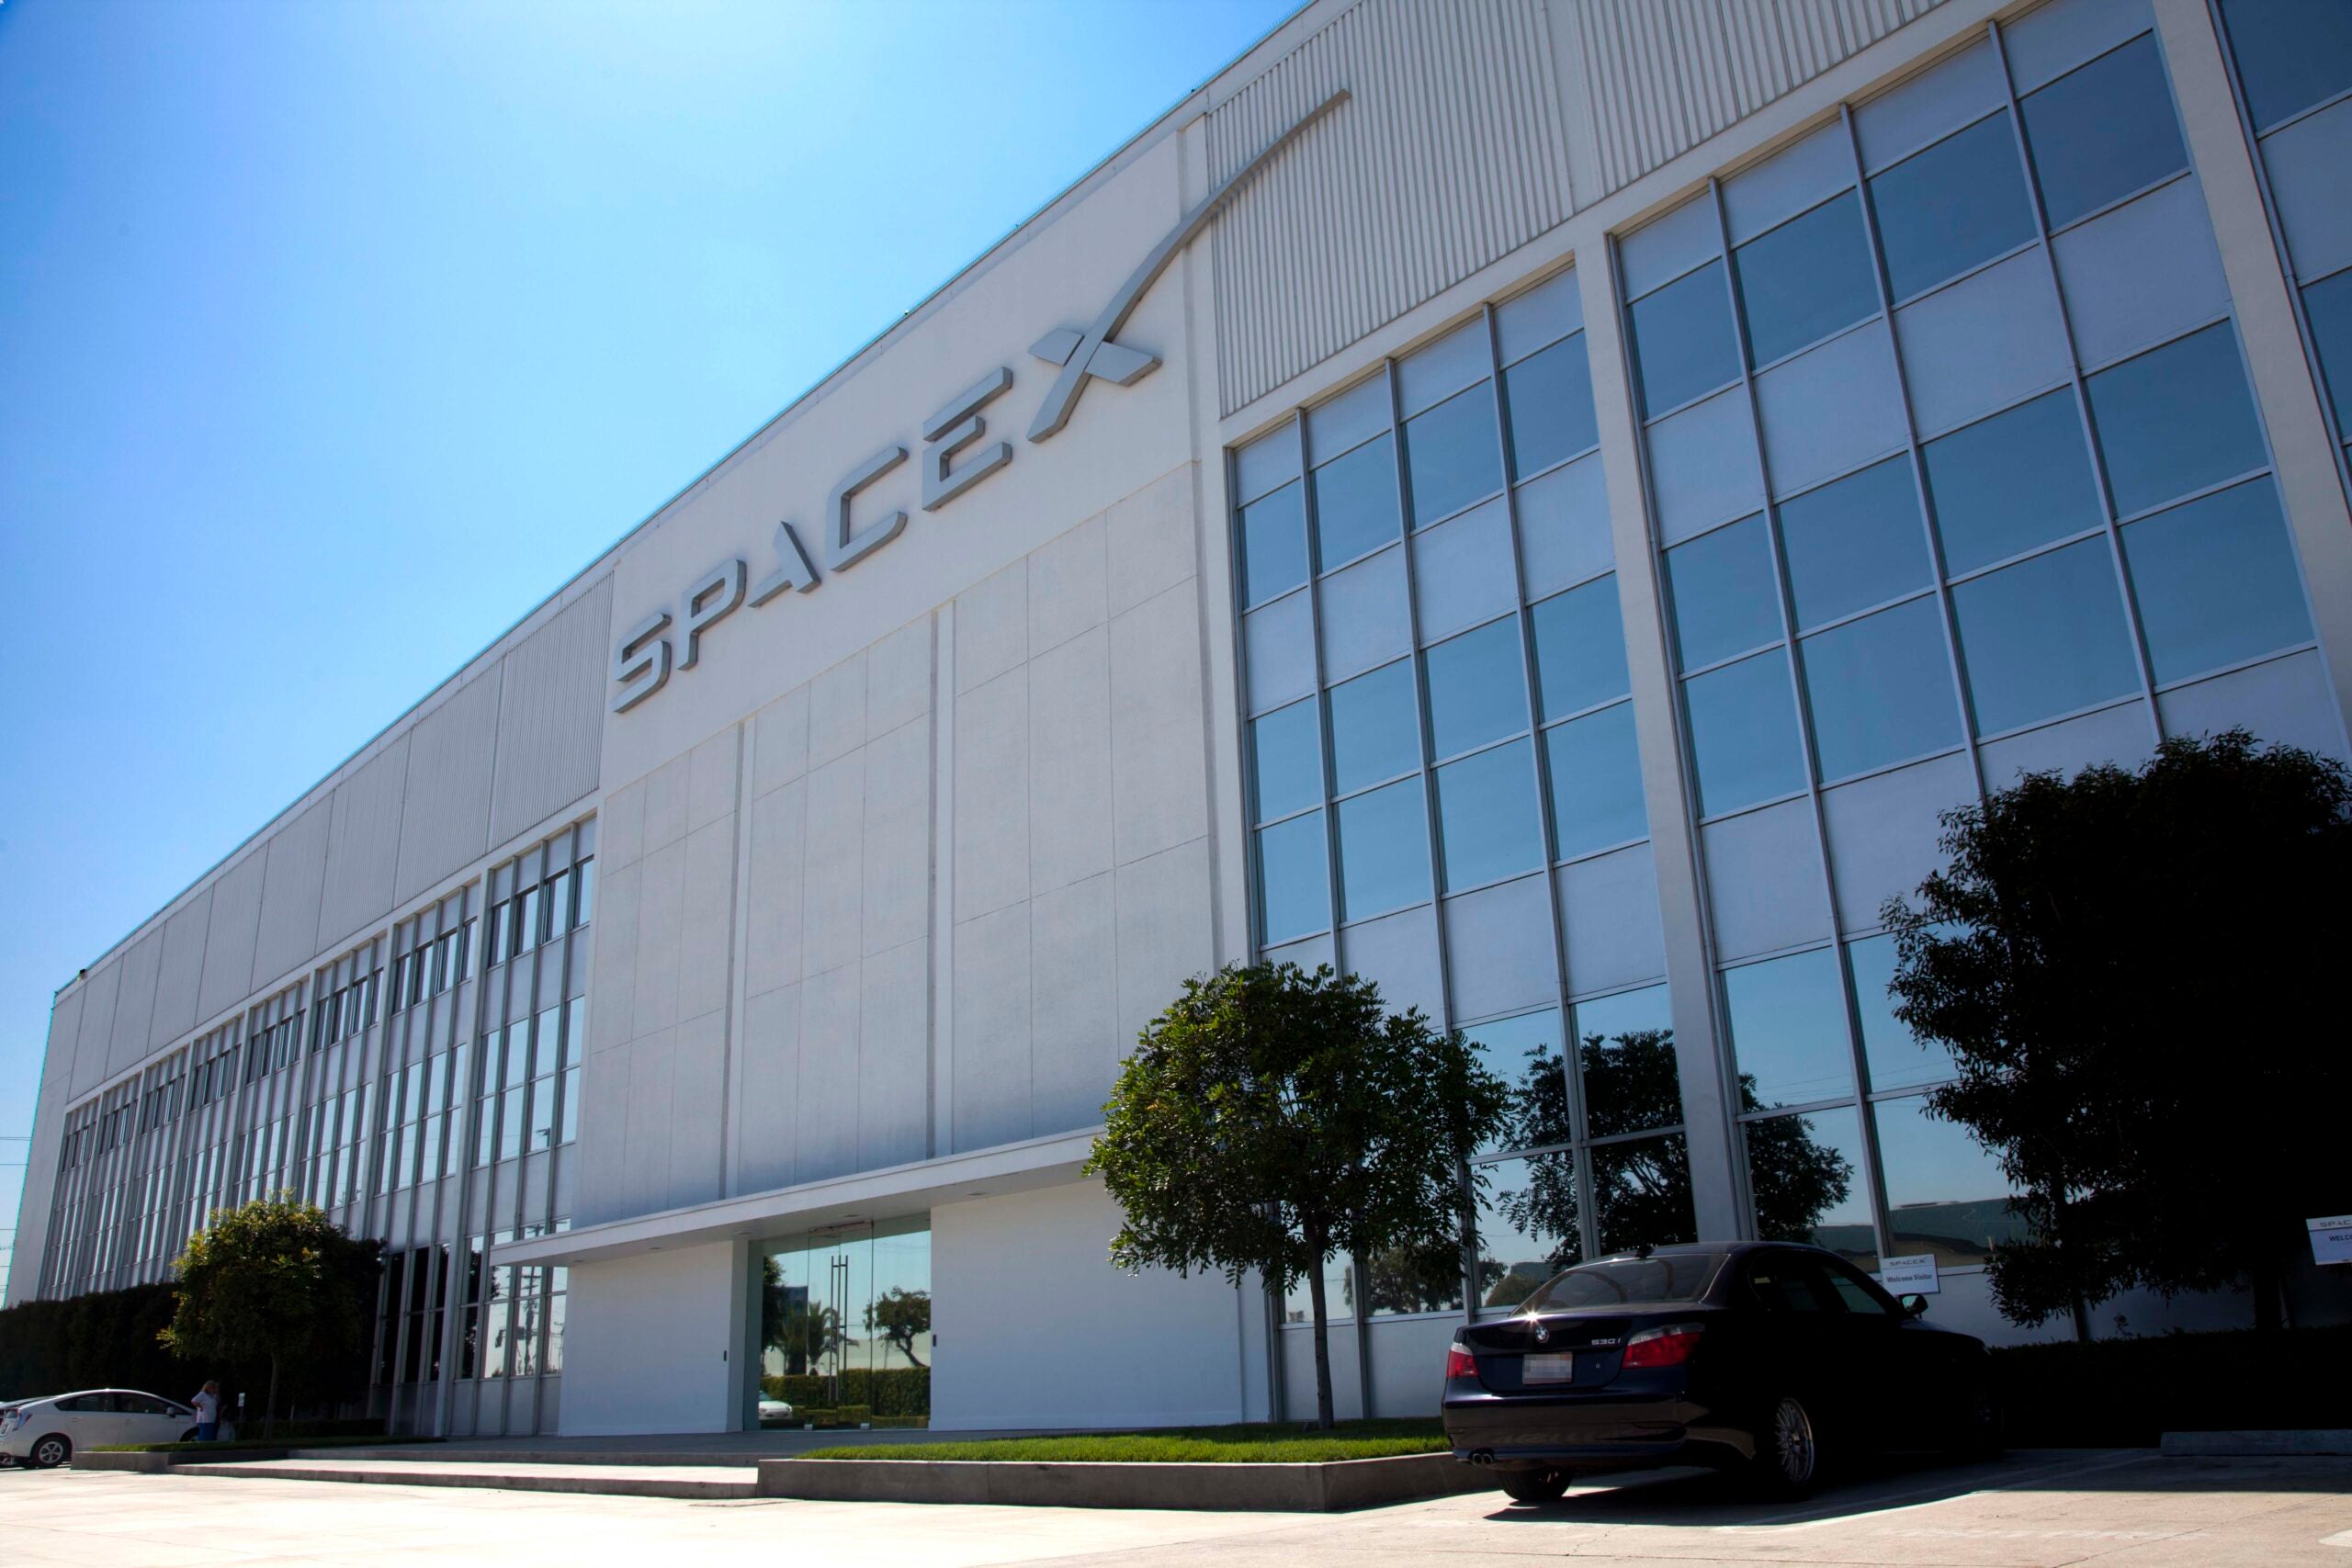 SpaceX Gets First GPS Launch Contract